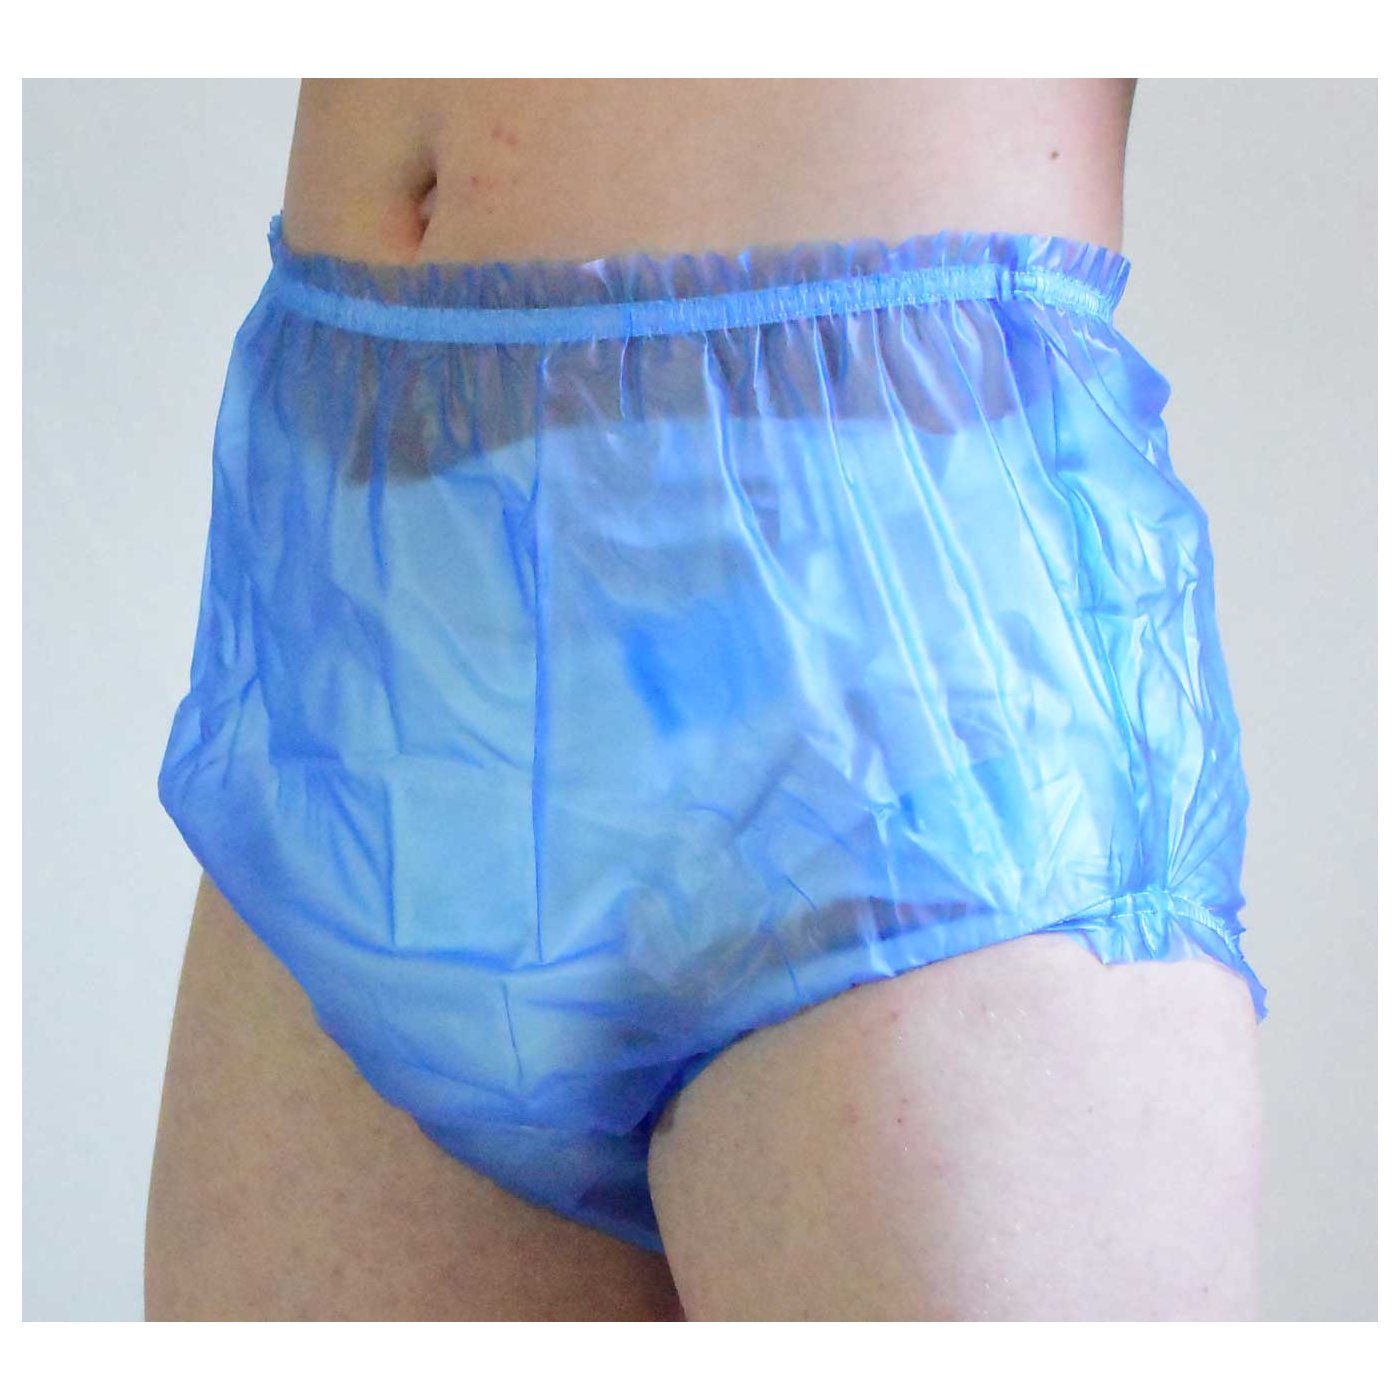 The AB-118 classic ABDL rubber pant, a comfortable slip-on pant